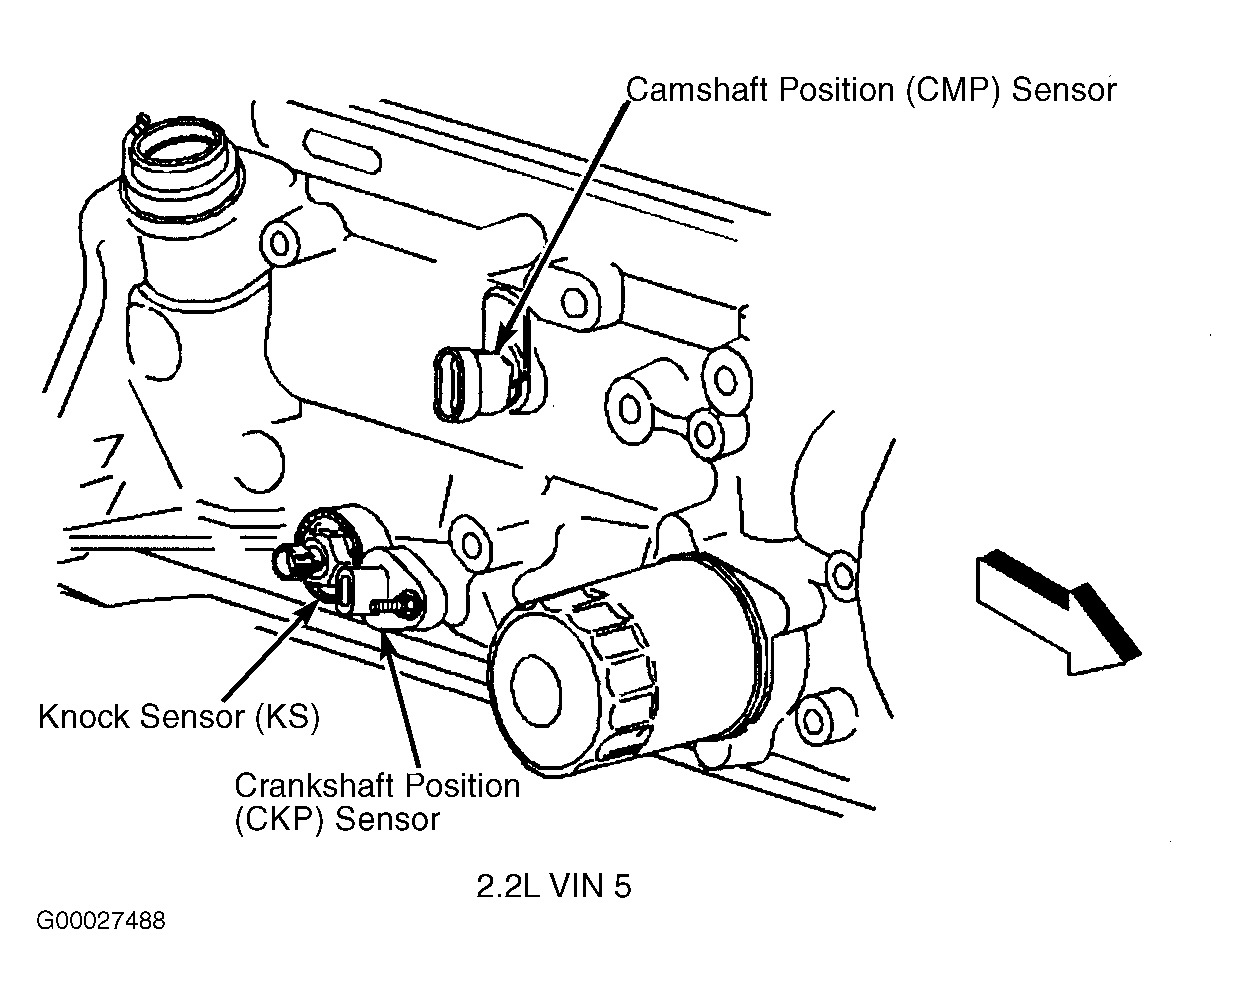 GMC Jimmy 2001 - Component Locations -  Right Side Of Engine (2.2L VIN 5)